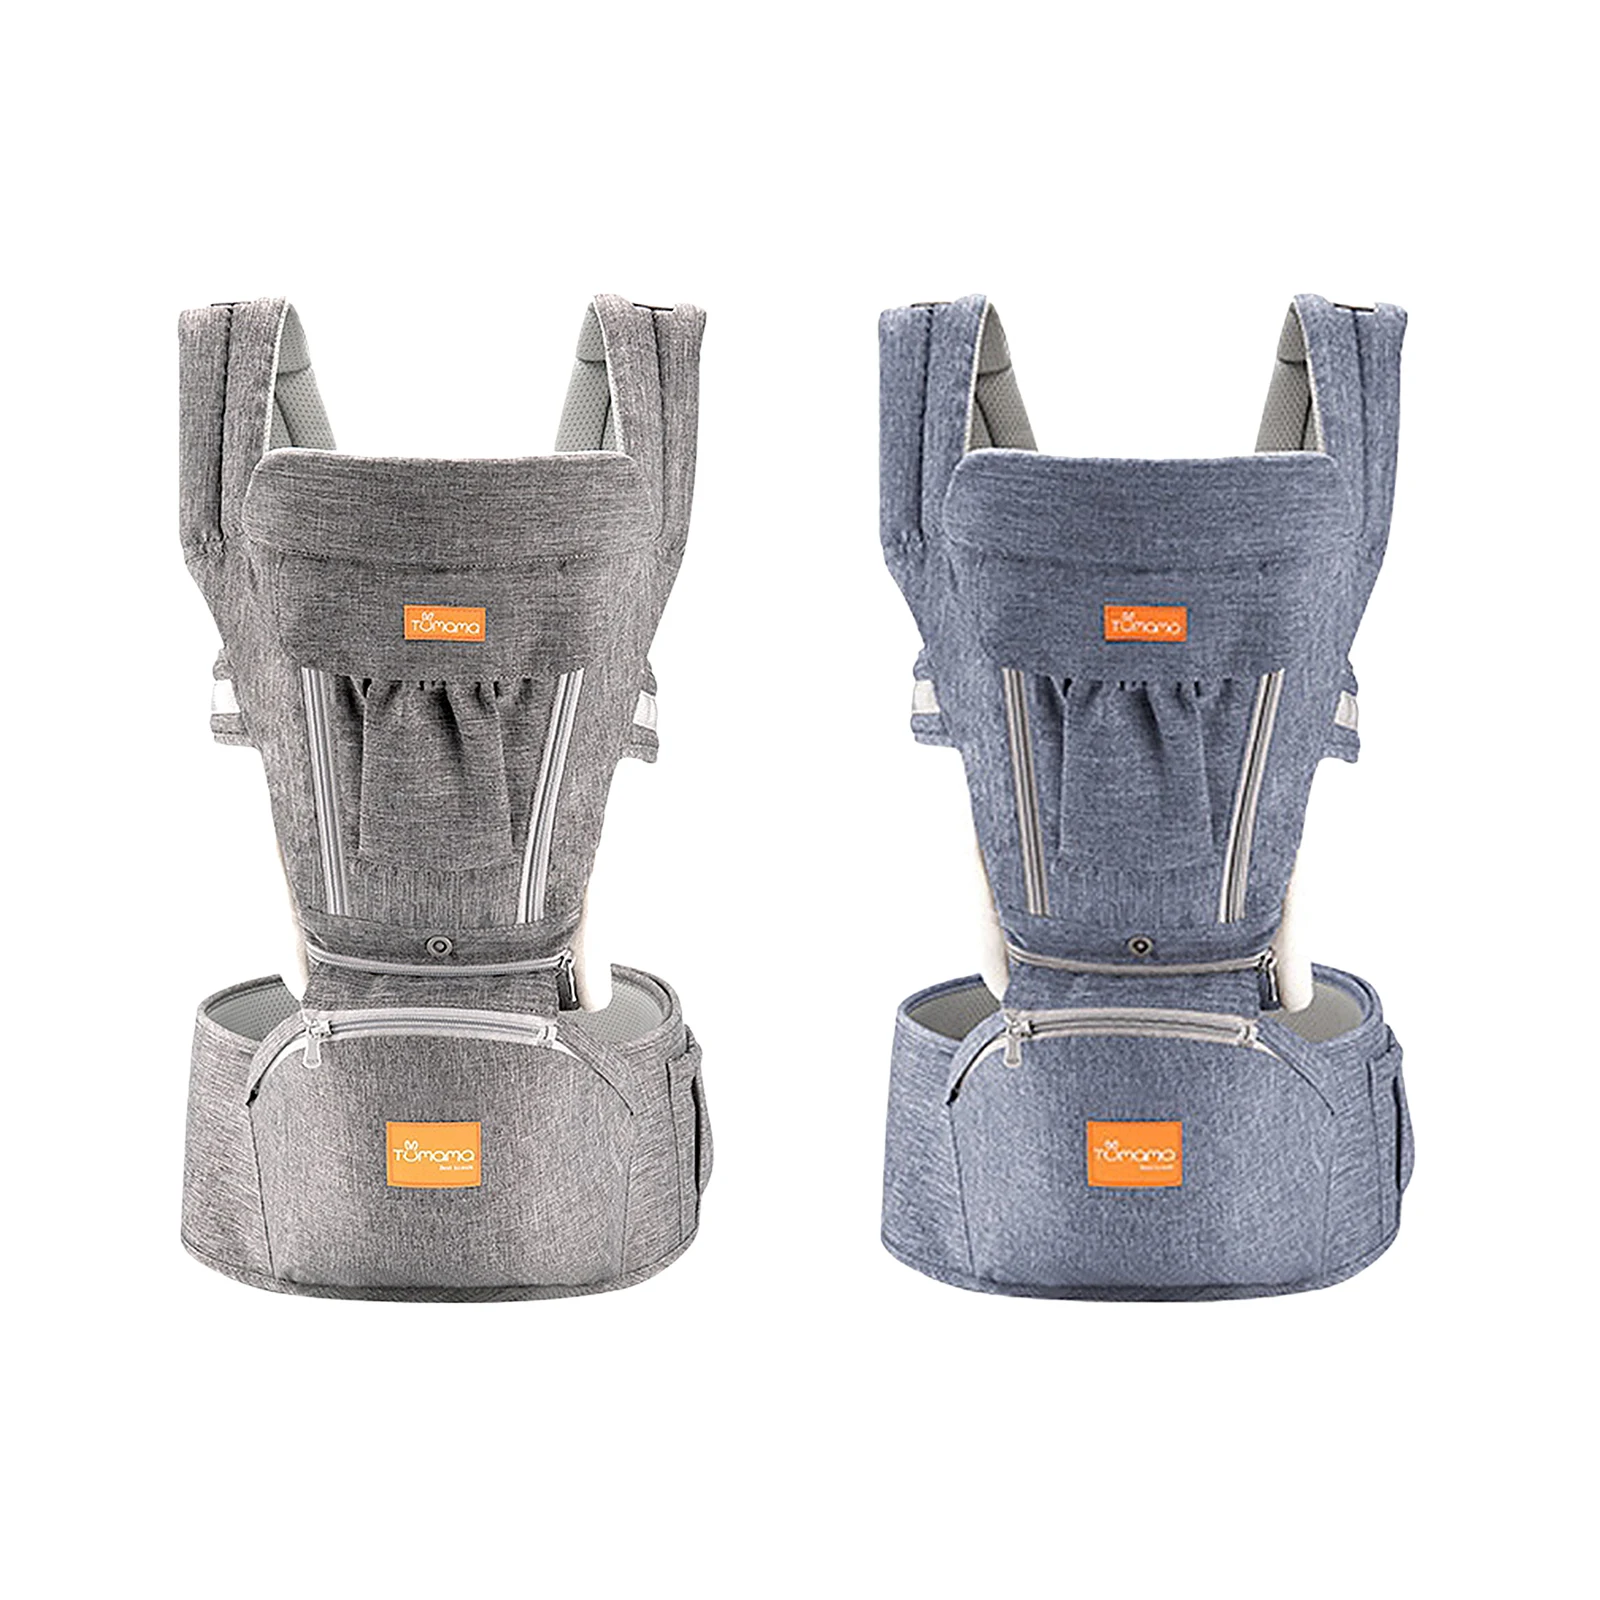 Baby Carrier for Baby Travel Weight-bearing 3.6-15kg 0-36 Months